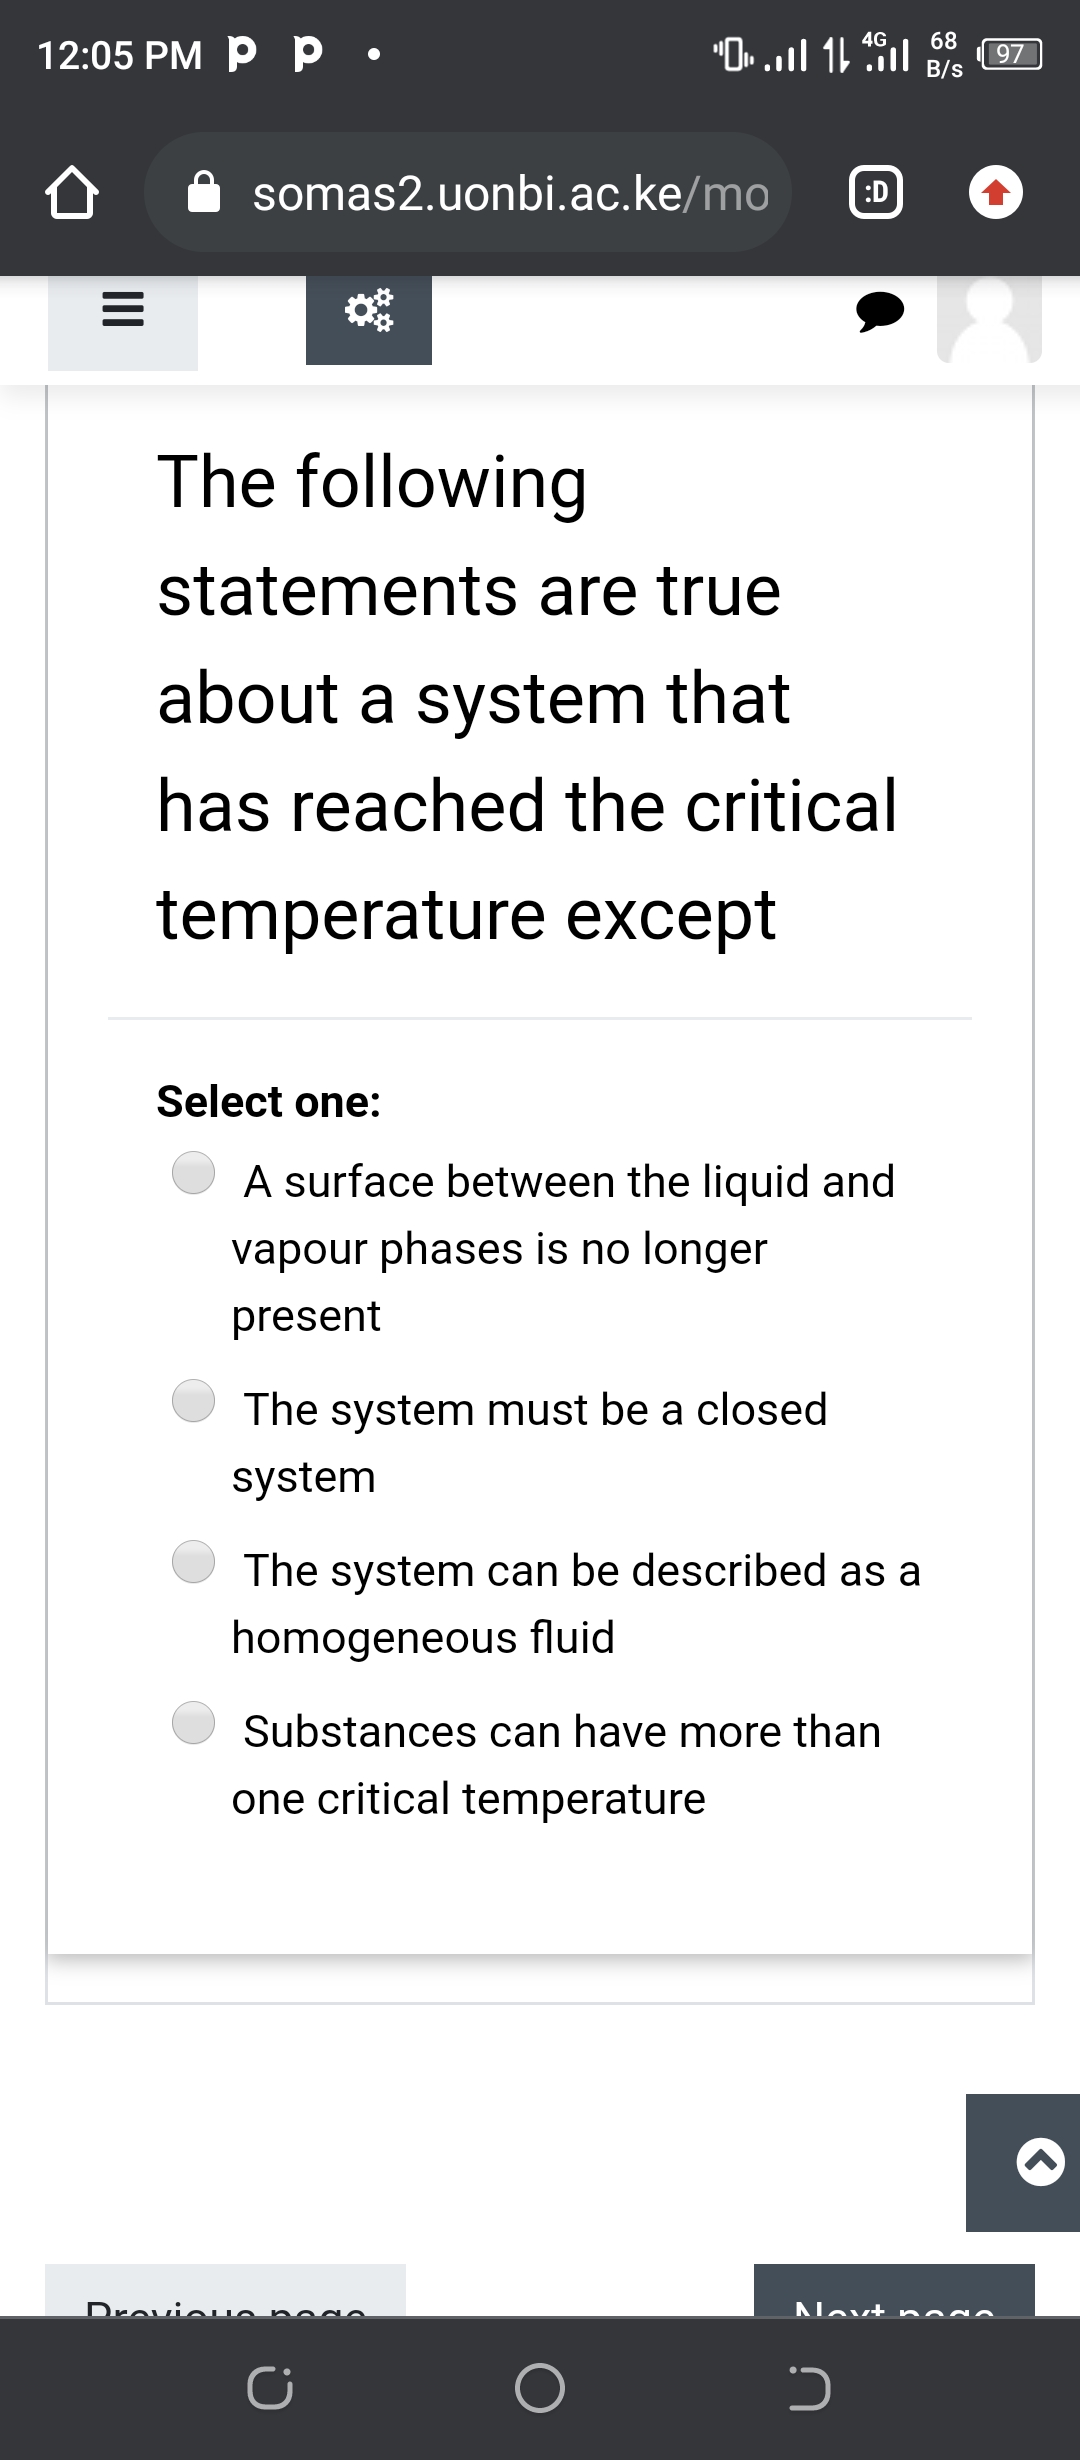 "O. ..l 1 l 97)
4G
68
12:05 PM P p •
B/s
somas2.uonbi.ac.ke/mo
:D
The following
statements are true
about a system that
has reached the critical
temperature except
Select one:
A surface between the liquid and
vapour phases is no longer
present
The system must be a closed
system
The system can be described as a
homogeneous fluid
Substances can have more than
one critical temperature
Drevieuo ne go
Novt ne
II
